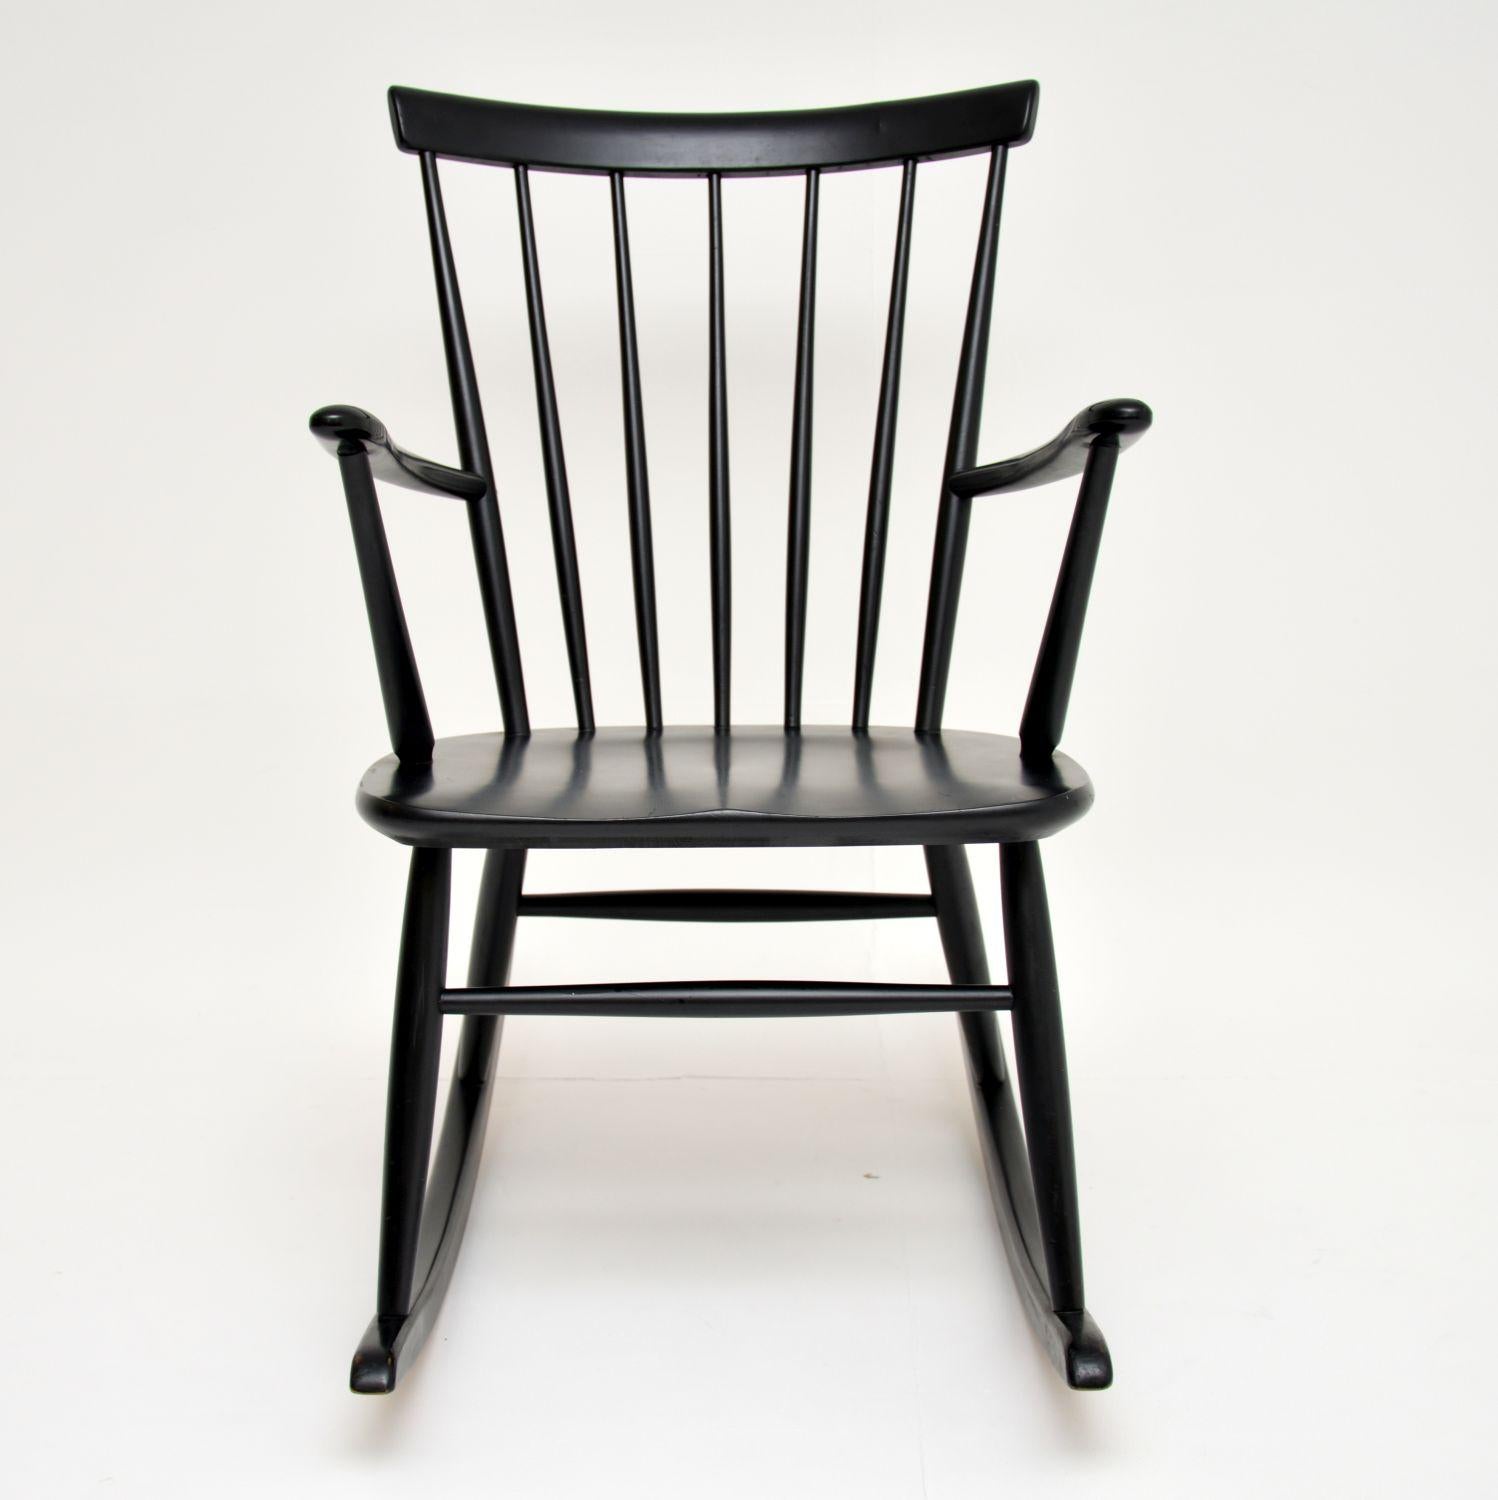 A beautifully executed vintage rocking chair, this was designed by Roland Rainer for Hagafors. It was made in Sweden, it dates from the 1960s-1970s. It’s made from ebonised solid wood, and the condition is superb for its age. There is just some